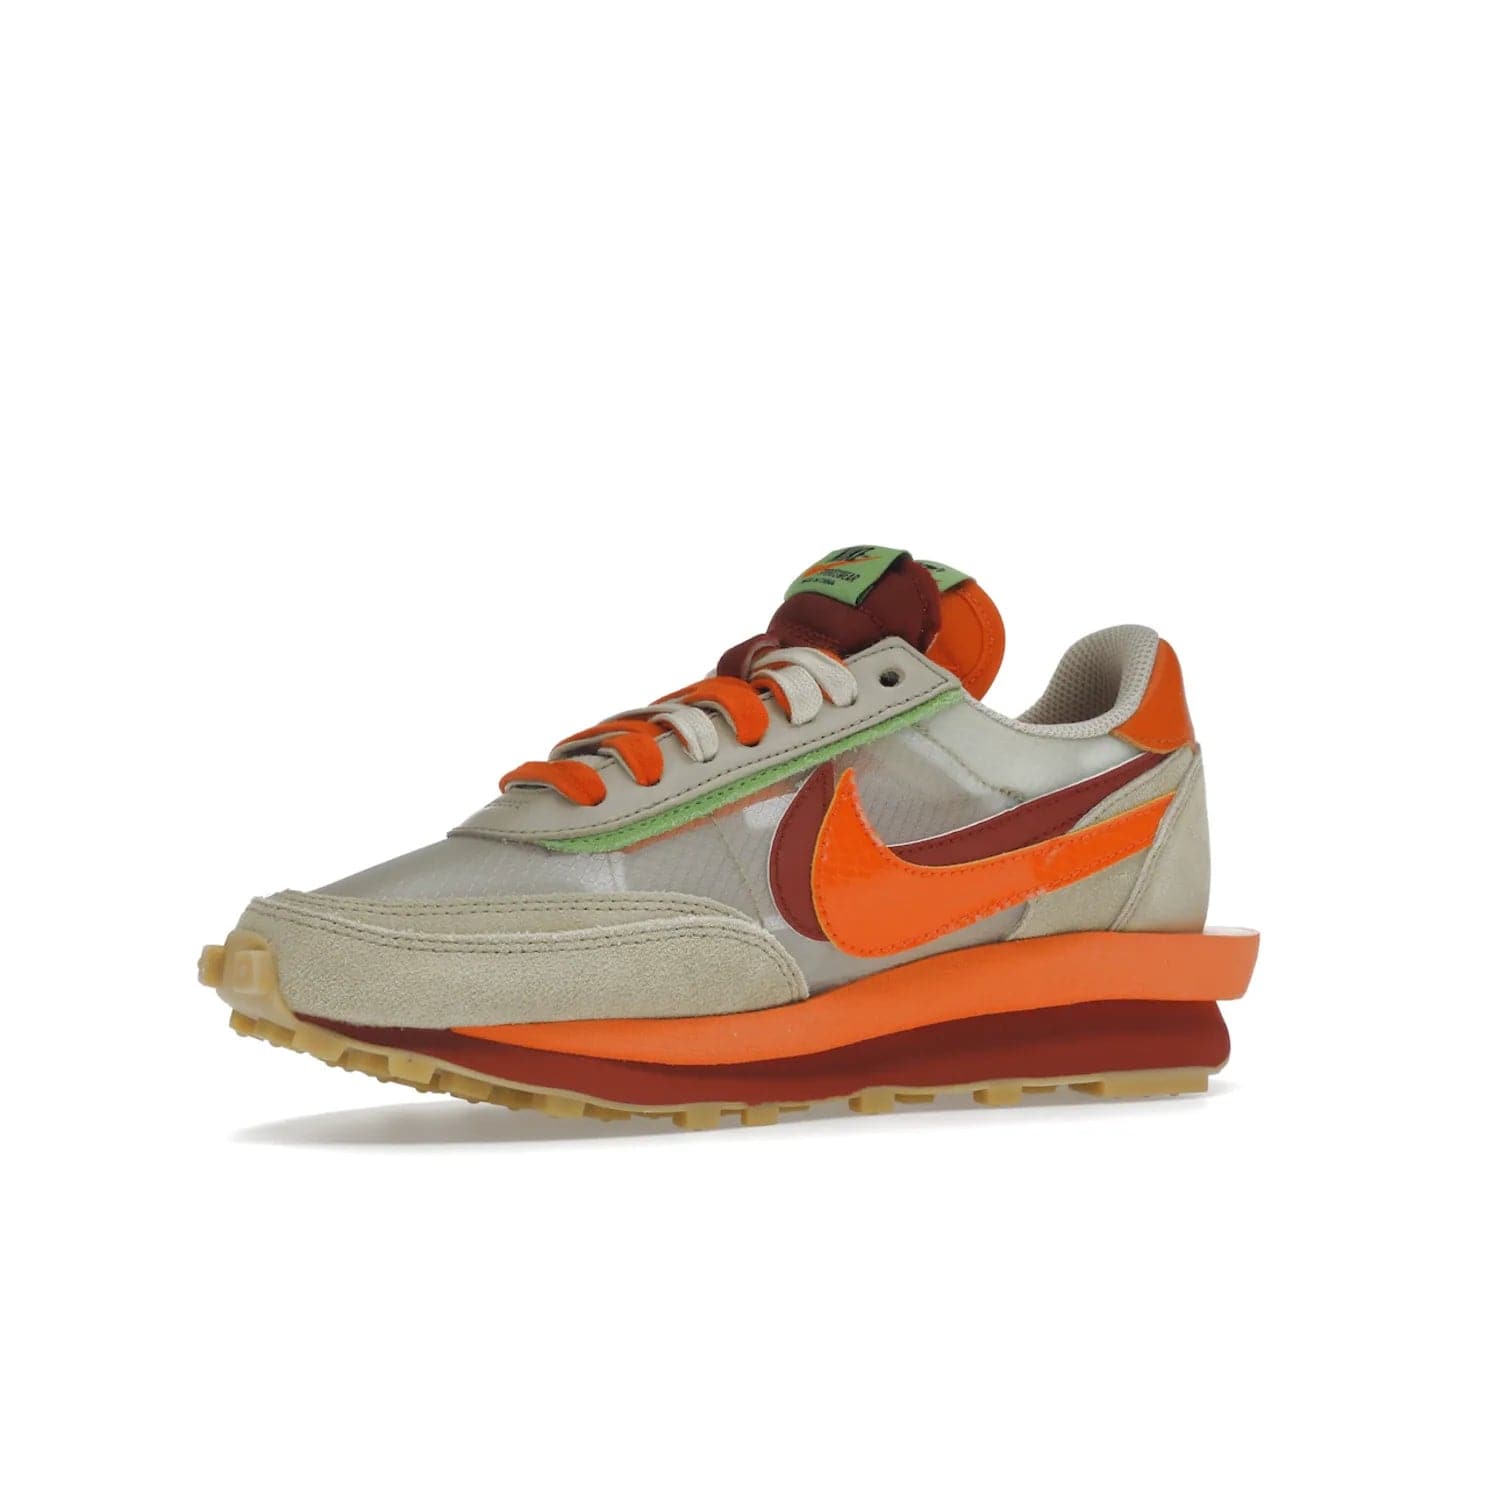 Nike LD Waffle sacai CLOT Kiss of Death Net Orange Blaze - Image 16 - Only at www.BallersClubKickz.com - A bold and stylish Nike LD Waffle sacai CLOT Kiss of Death Net Orange Blaze sneaker featuring a unique off-white, Deep Red & Orange Blaze Swooshes, two-toned stacked sole and doubled tongue. Available in September 2021. Make a statement.